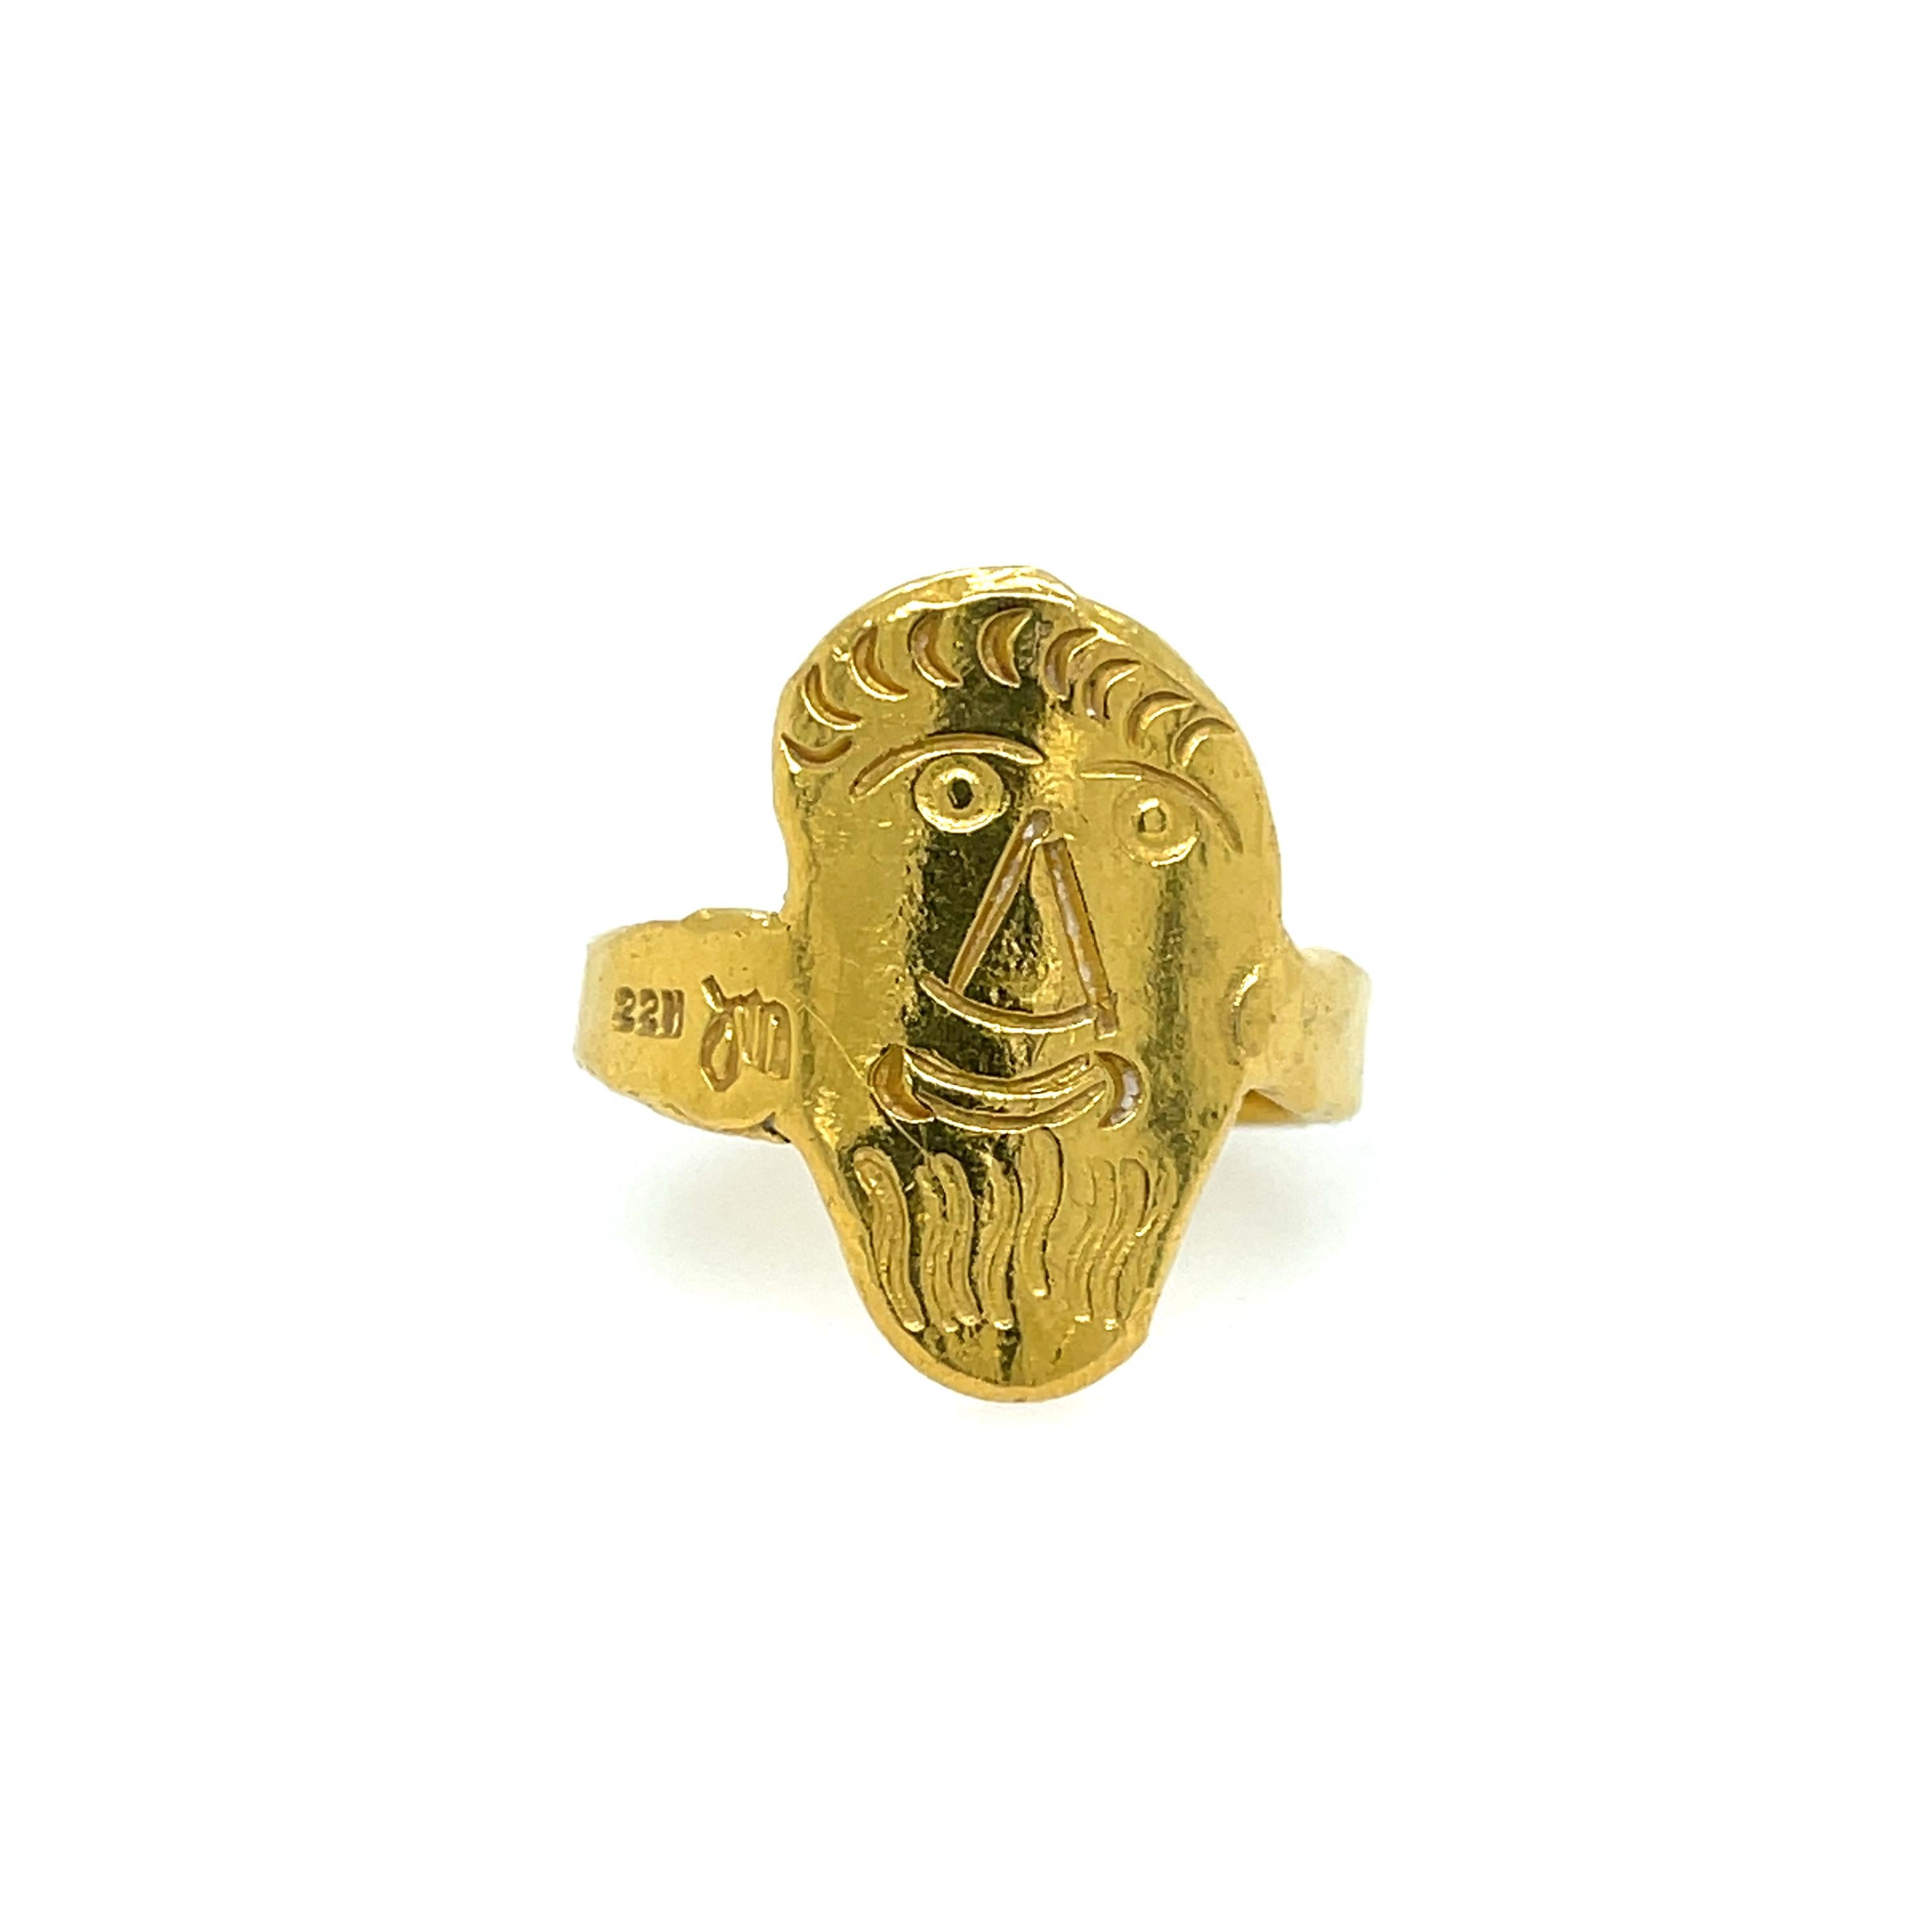 Estate Jean Mahie 22K Yellow Gold Face Ring. The ring portrays a kind smiling face.
Ring size 7.5
12.80 grams